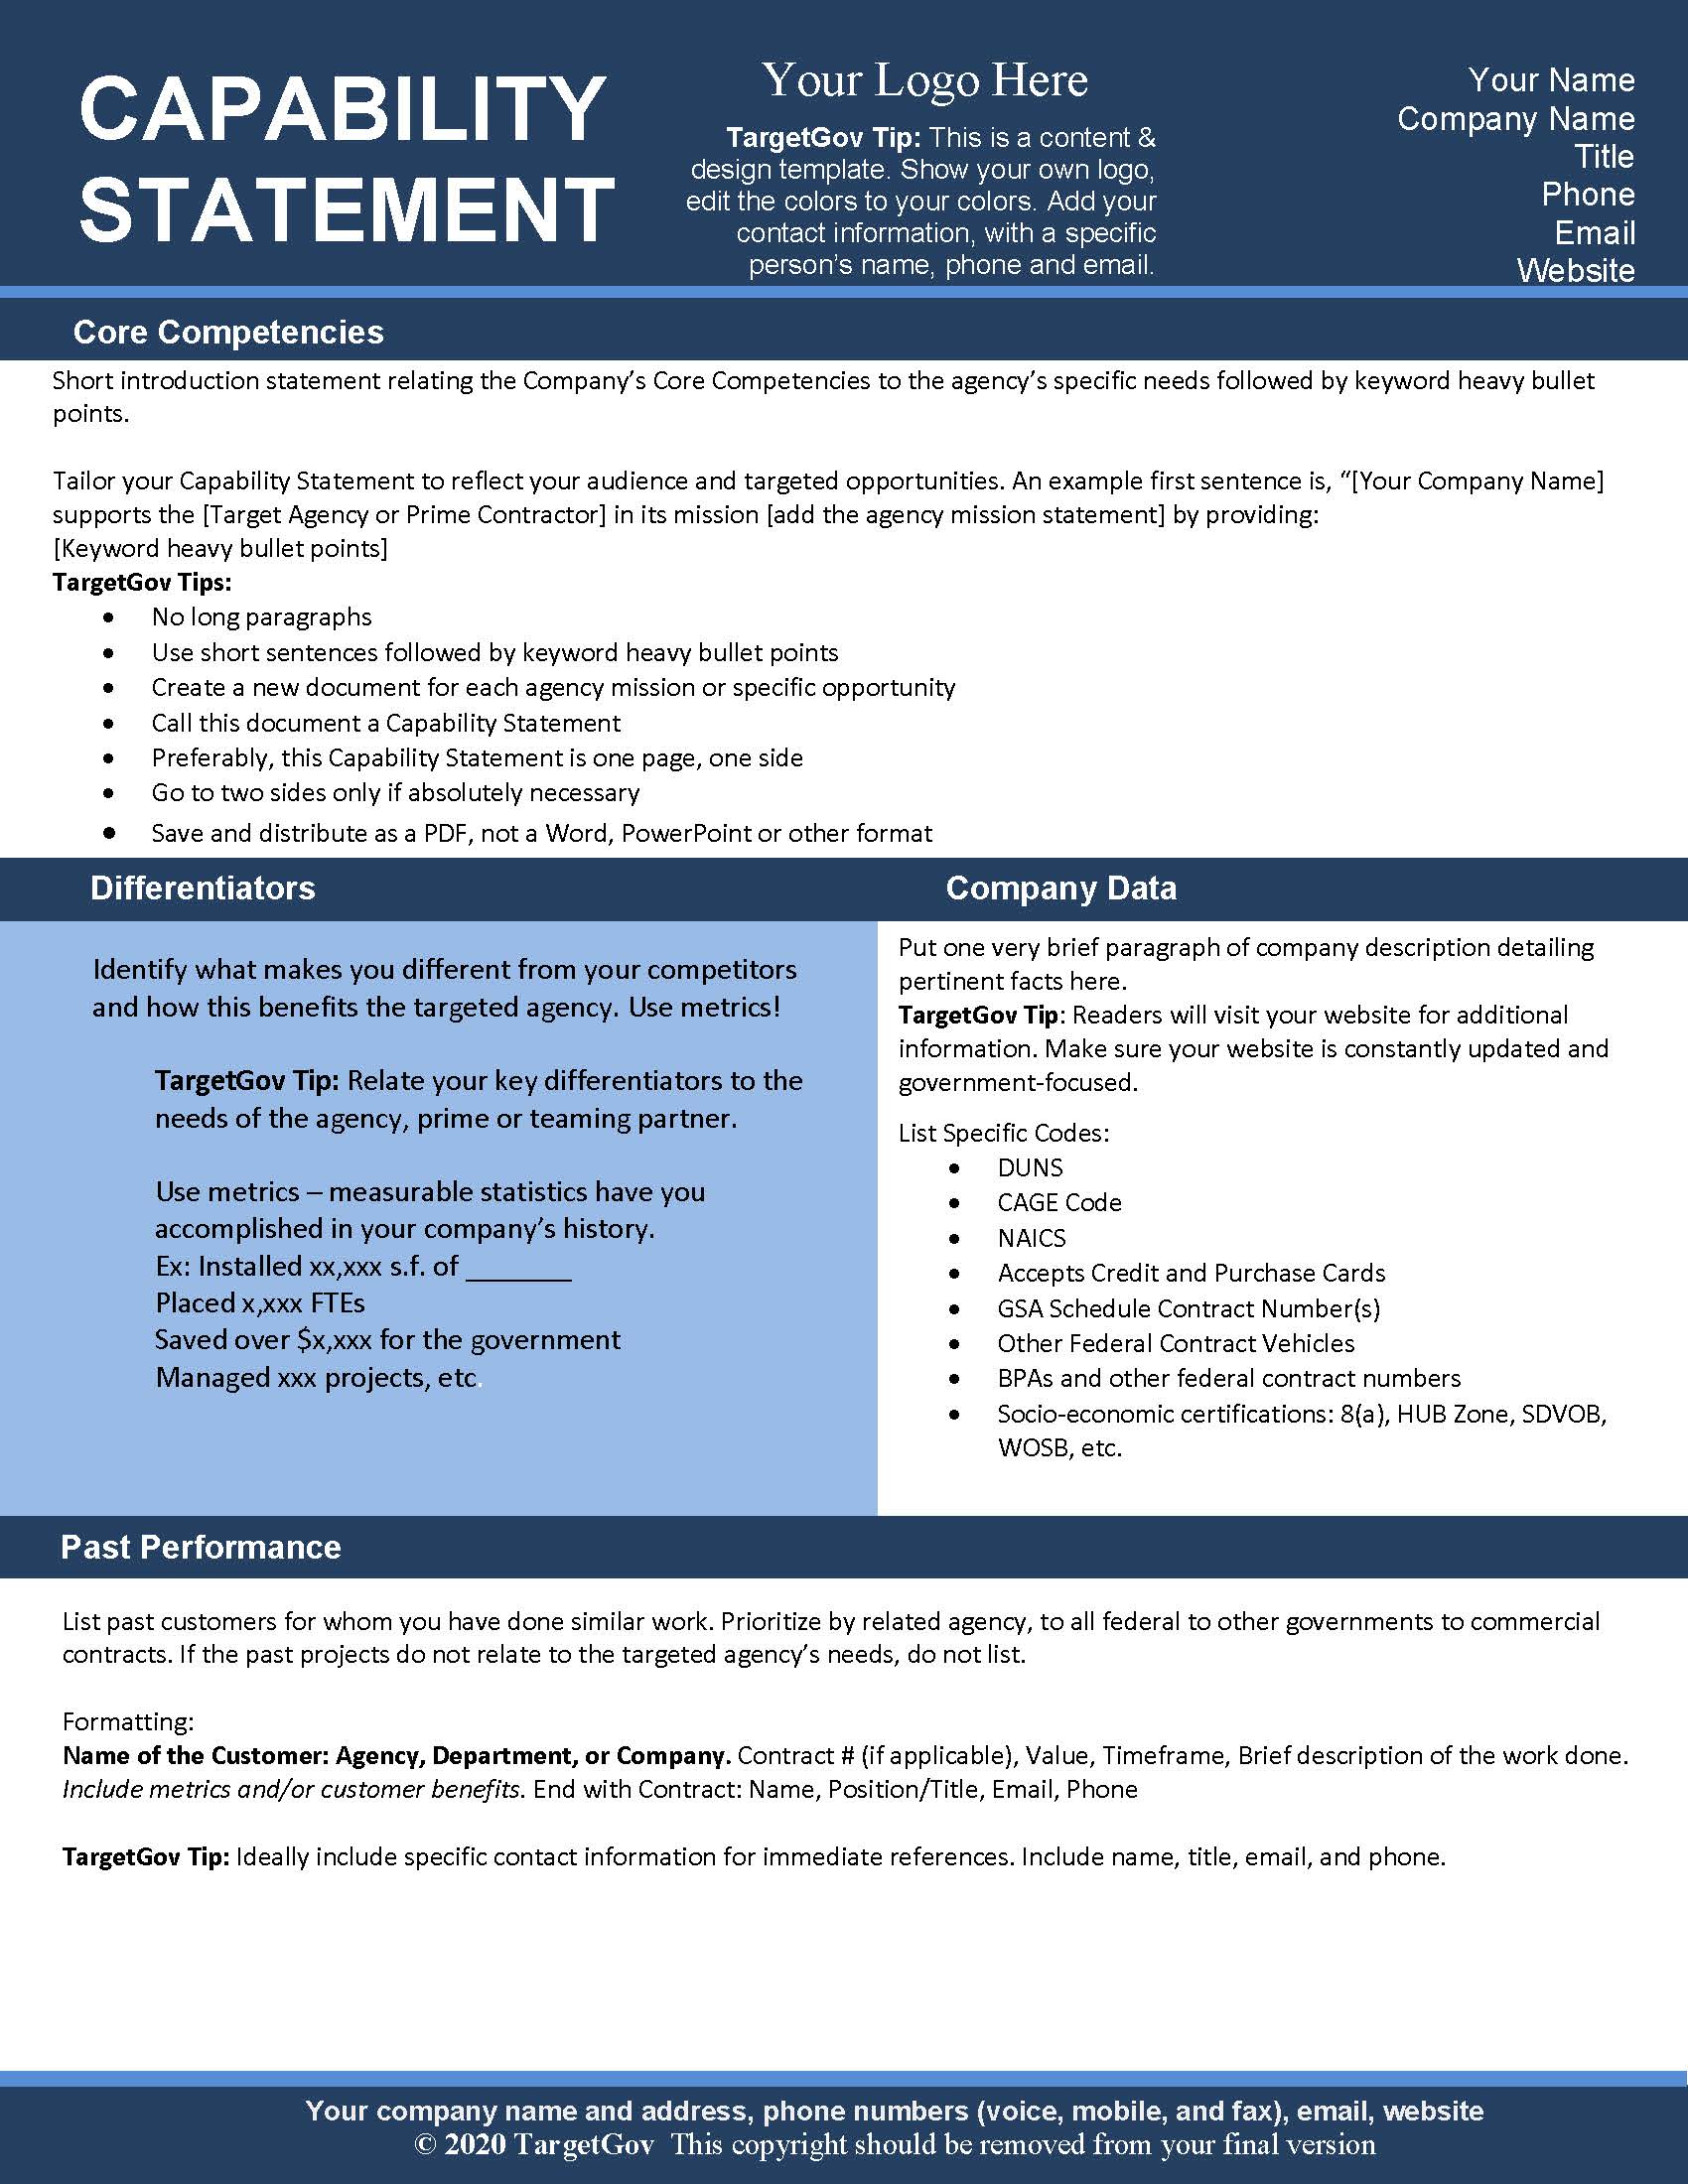 Capability Statement Editable Template Blue and Blue TargetGov